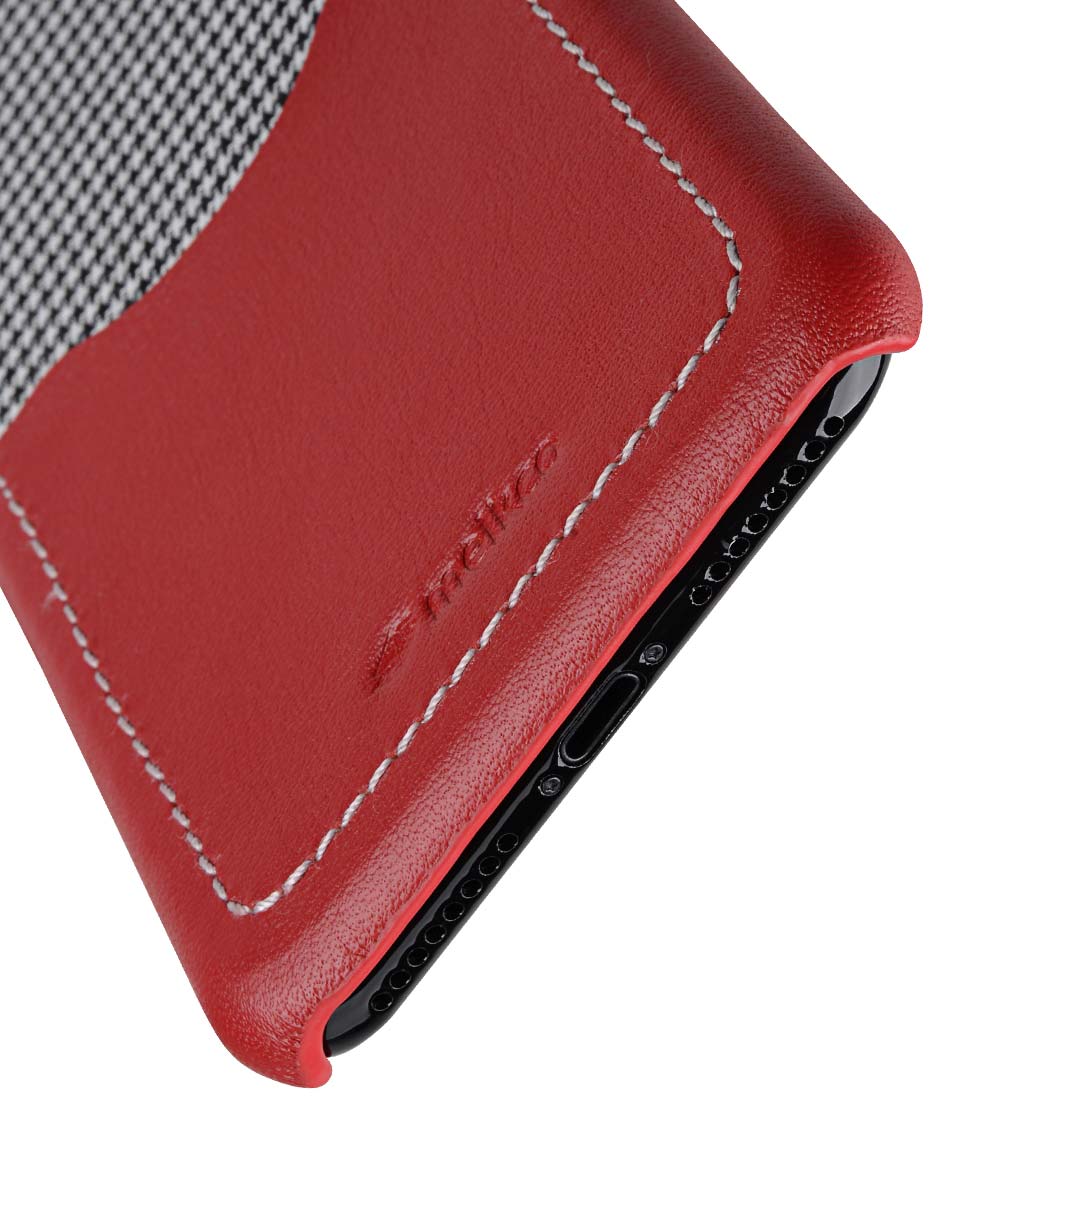 Melkco Holmes Series Tobacco Genuine Leather Snap Cover with Card slot Case for Apple iPhone 7 / 8 Plus (5.5") - (Red)